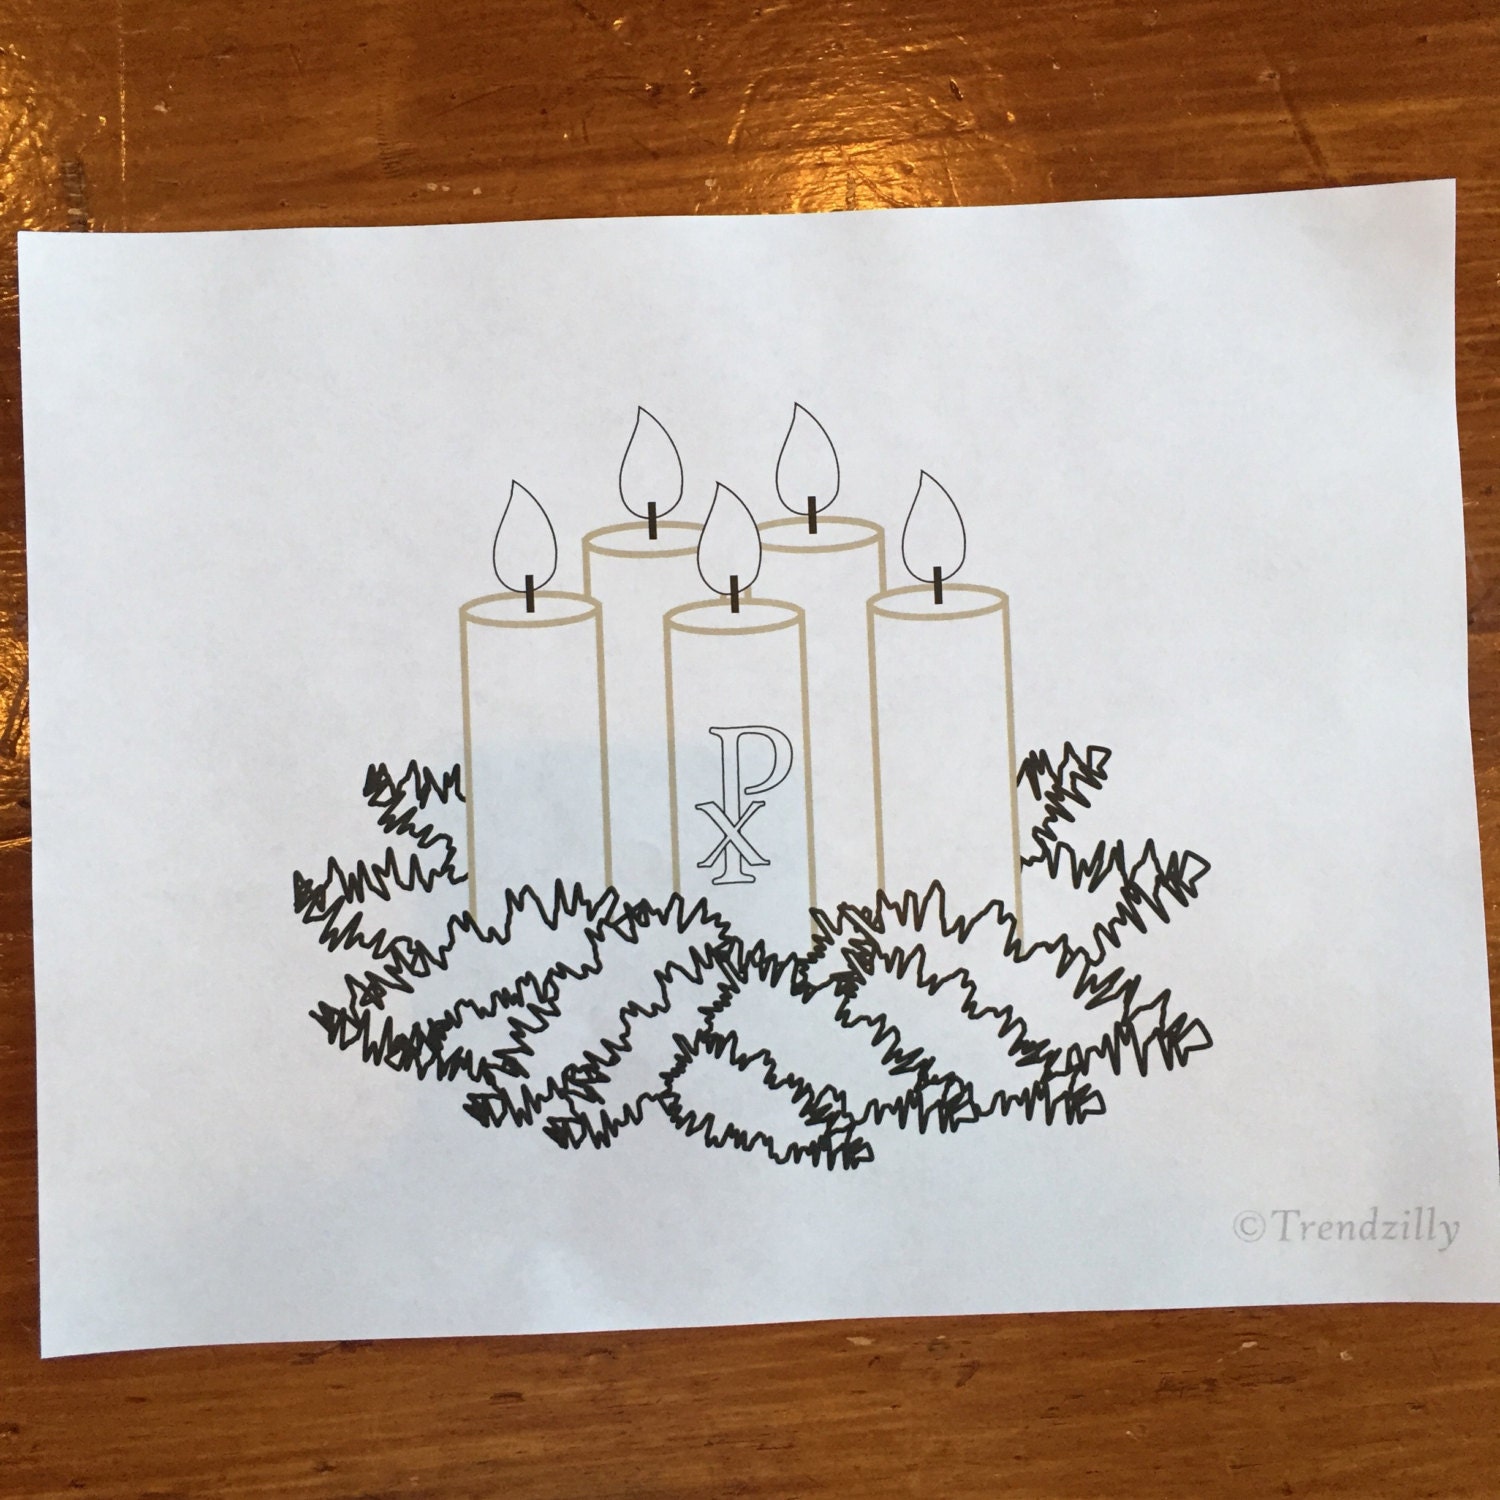 advent candles coloring sheet